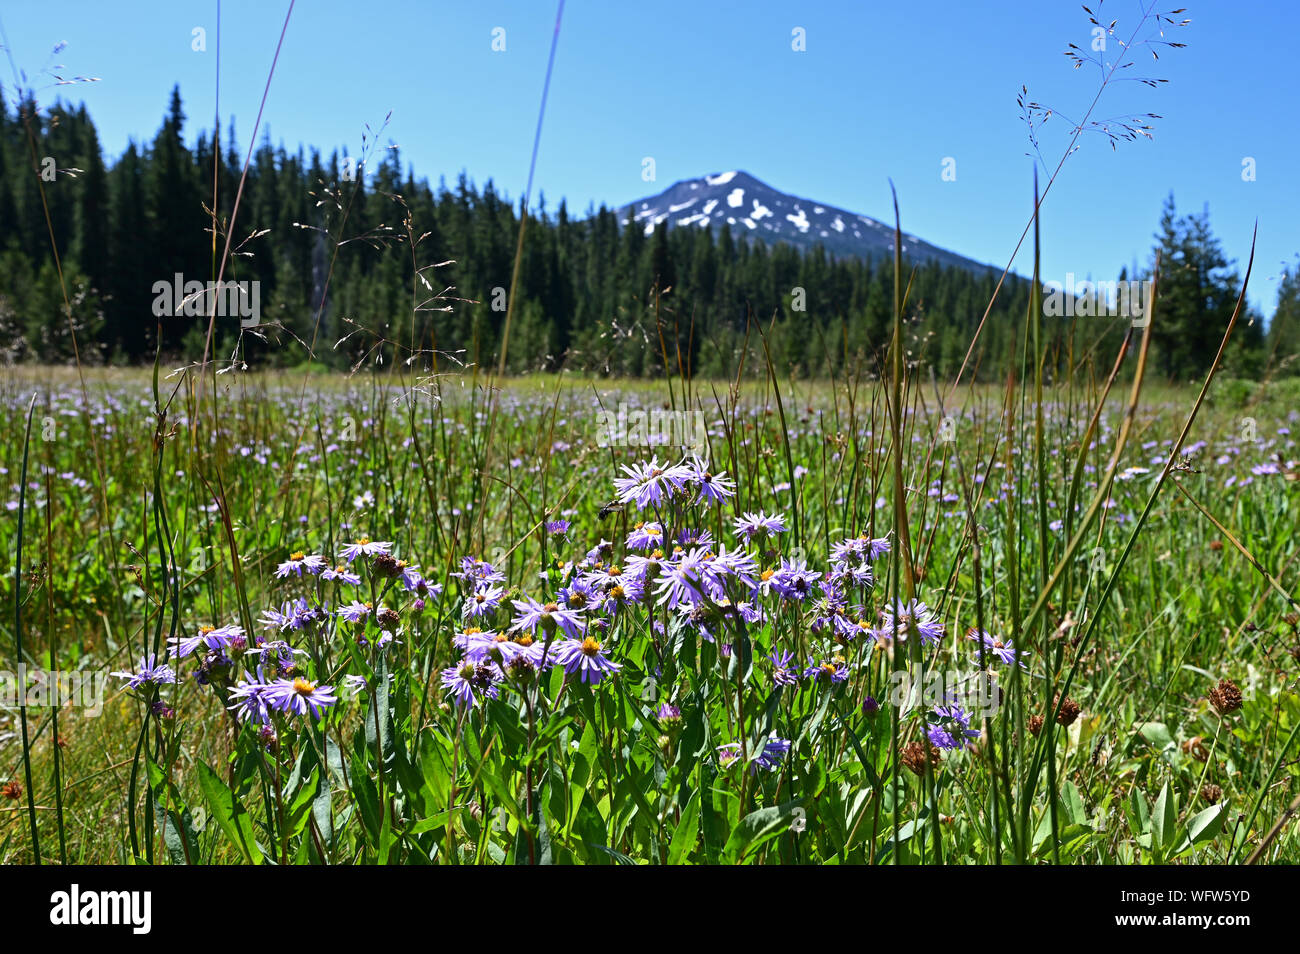 Field of Mountain Daisy - Erigeron peregrinus - with Mount Bachelor in background on clear sunny summer day. Stock Photo